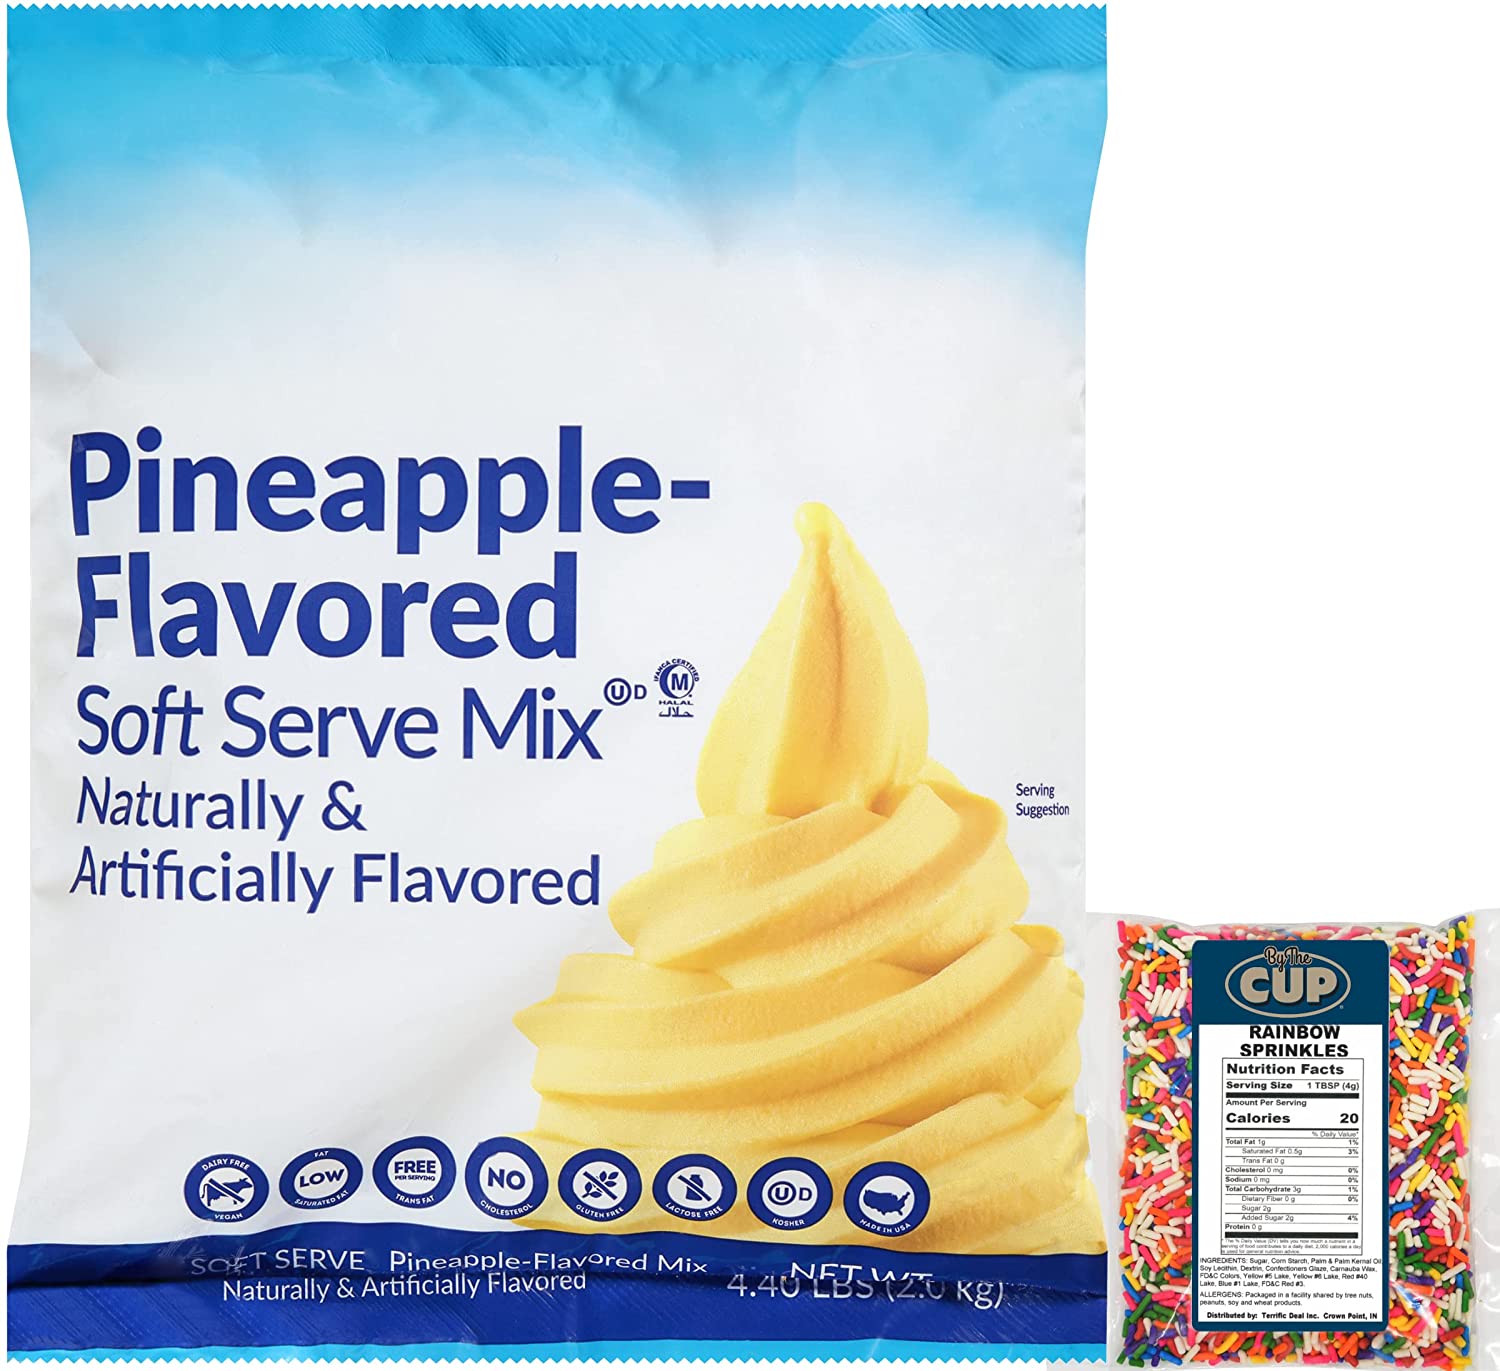 Dole Adds Three More Flavors and New Mix-Friendly Bowl to Its